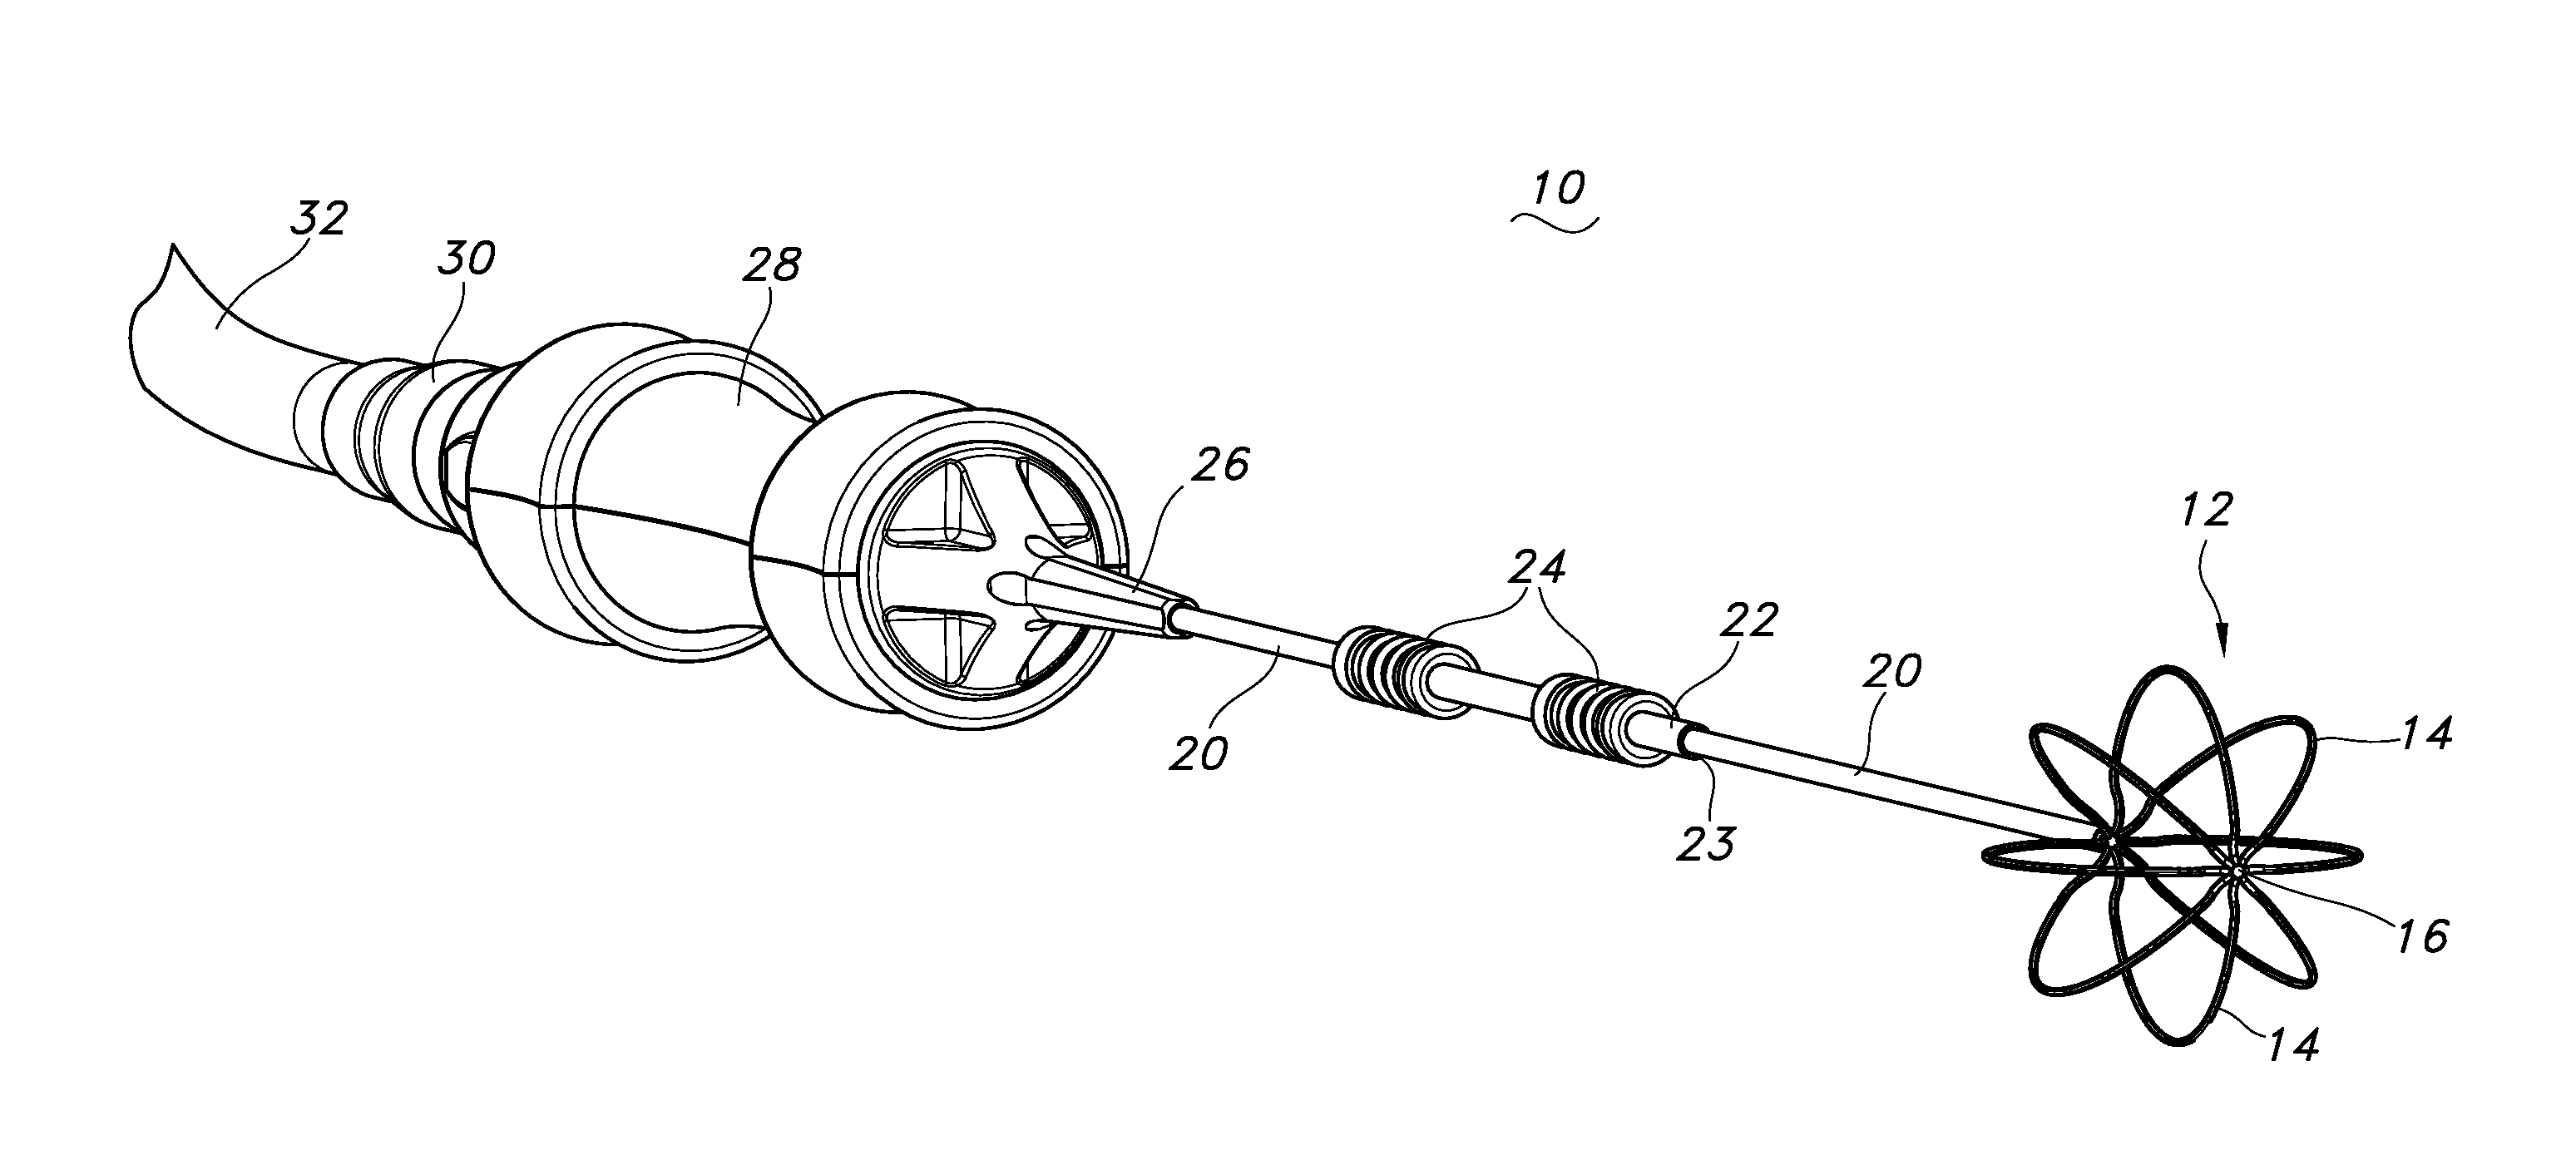 Flexible electrode assembly for insertion into body lumen or organ